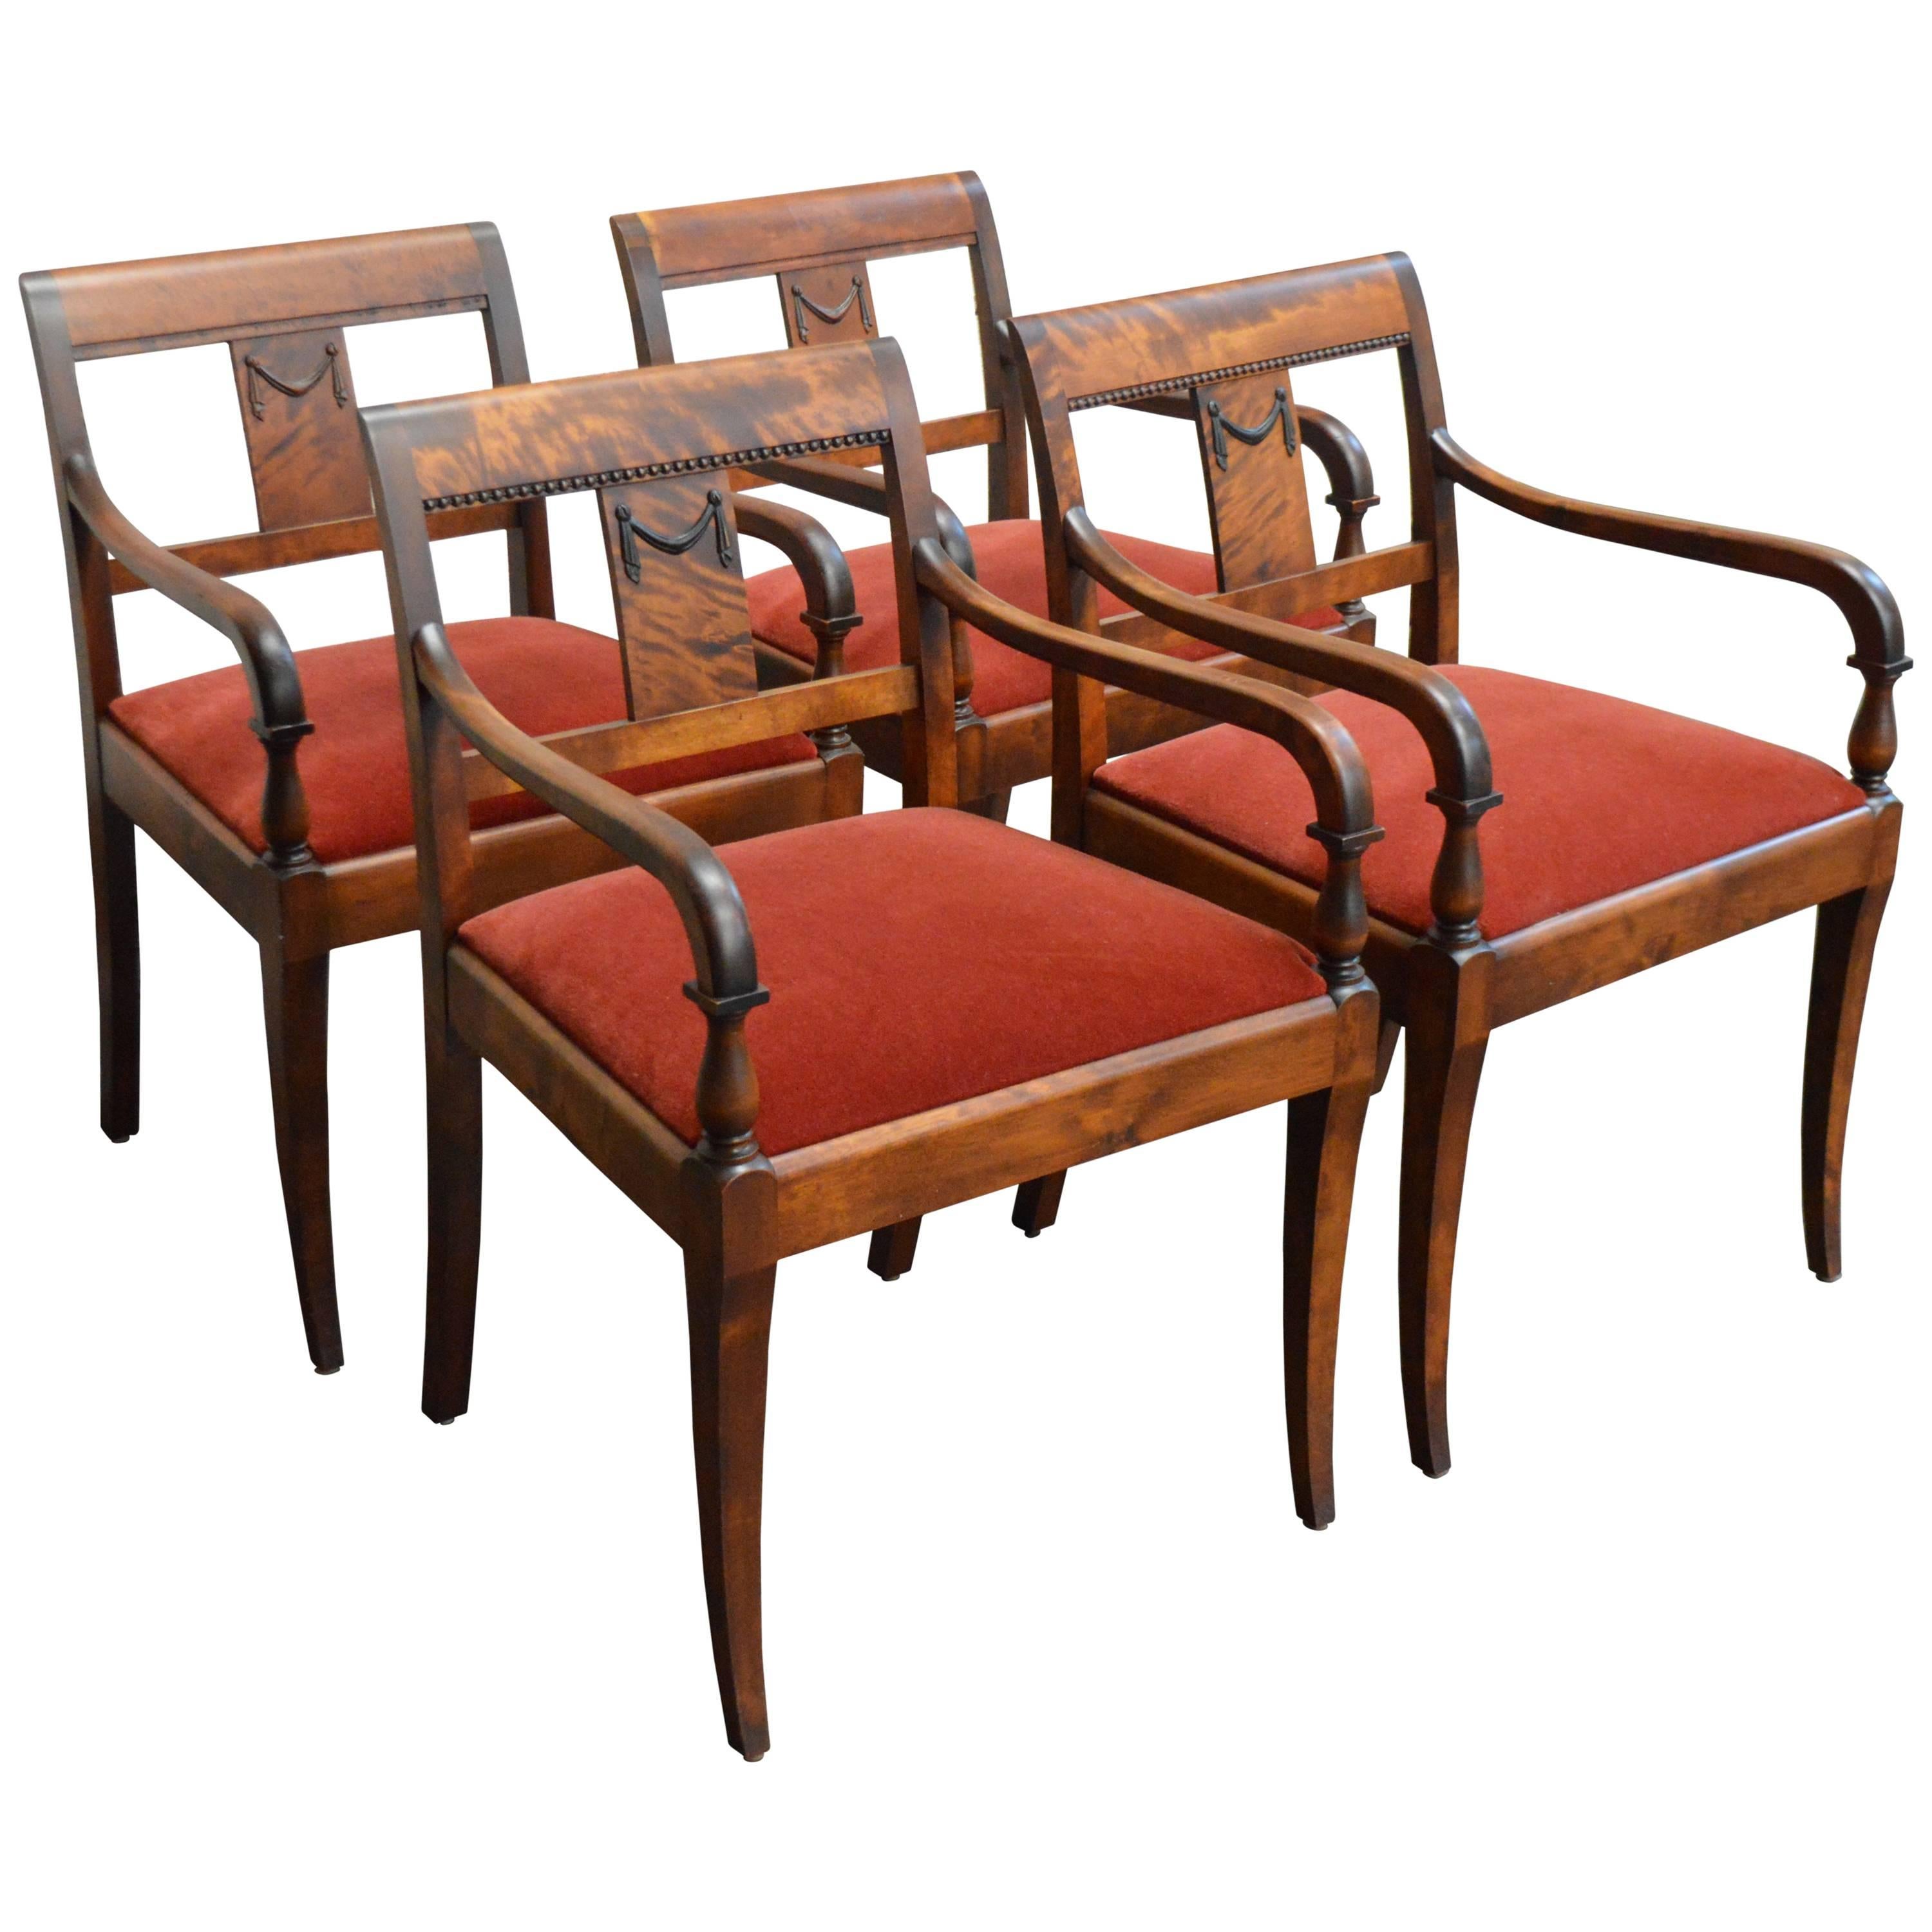 Set of Four Vintage Swedish Neoclassical Style Armchairs